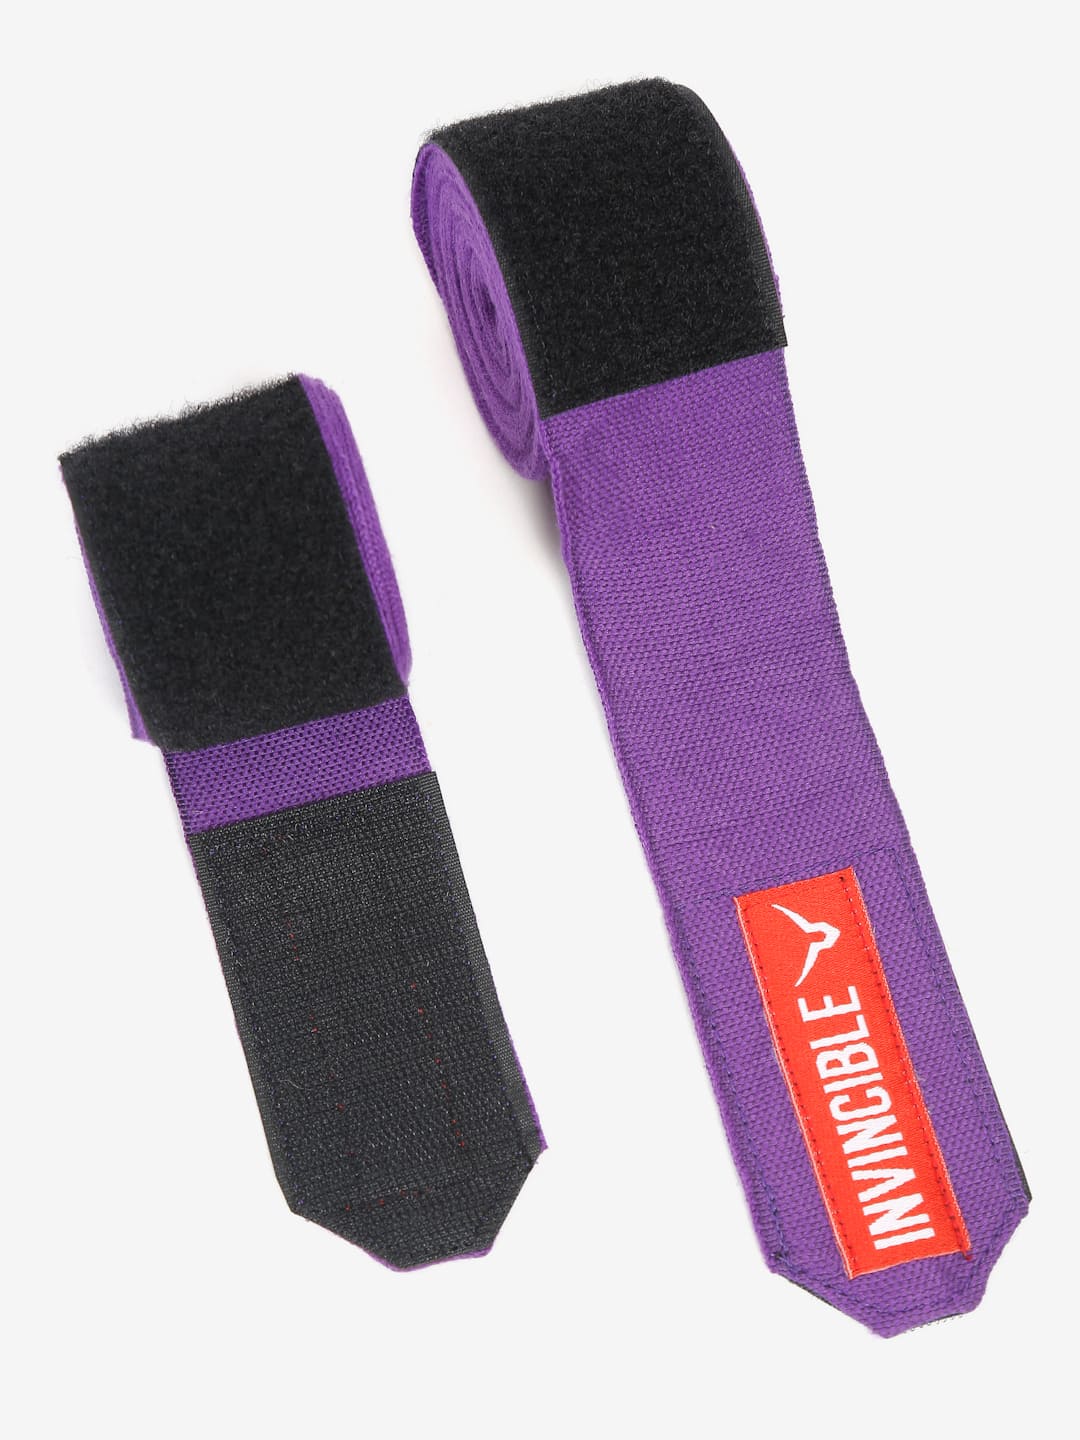 Invincible Mexican Style Semi-Stretch Hand Wraps